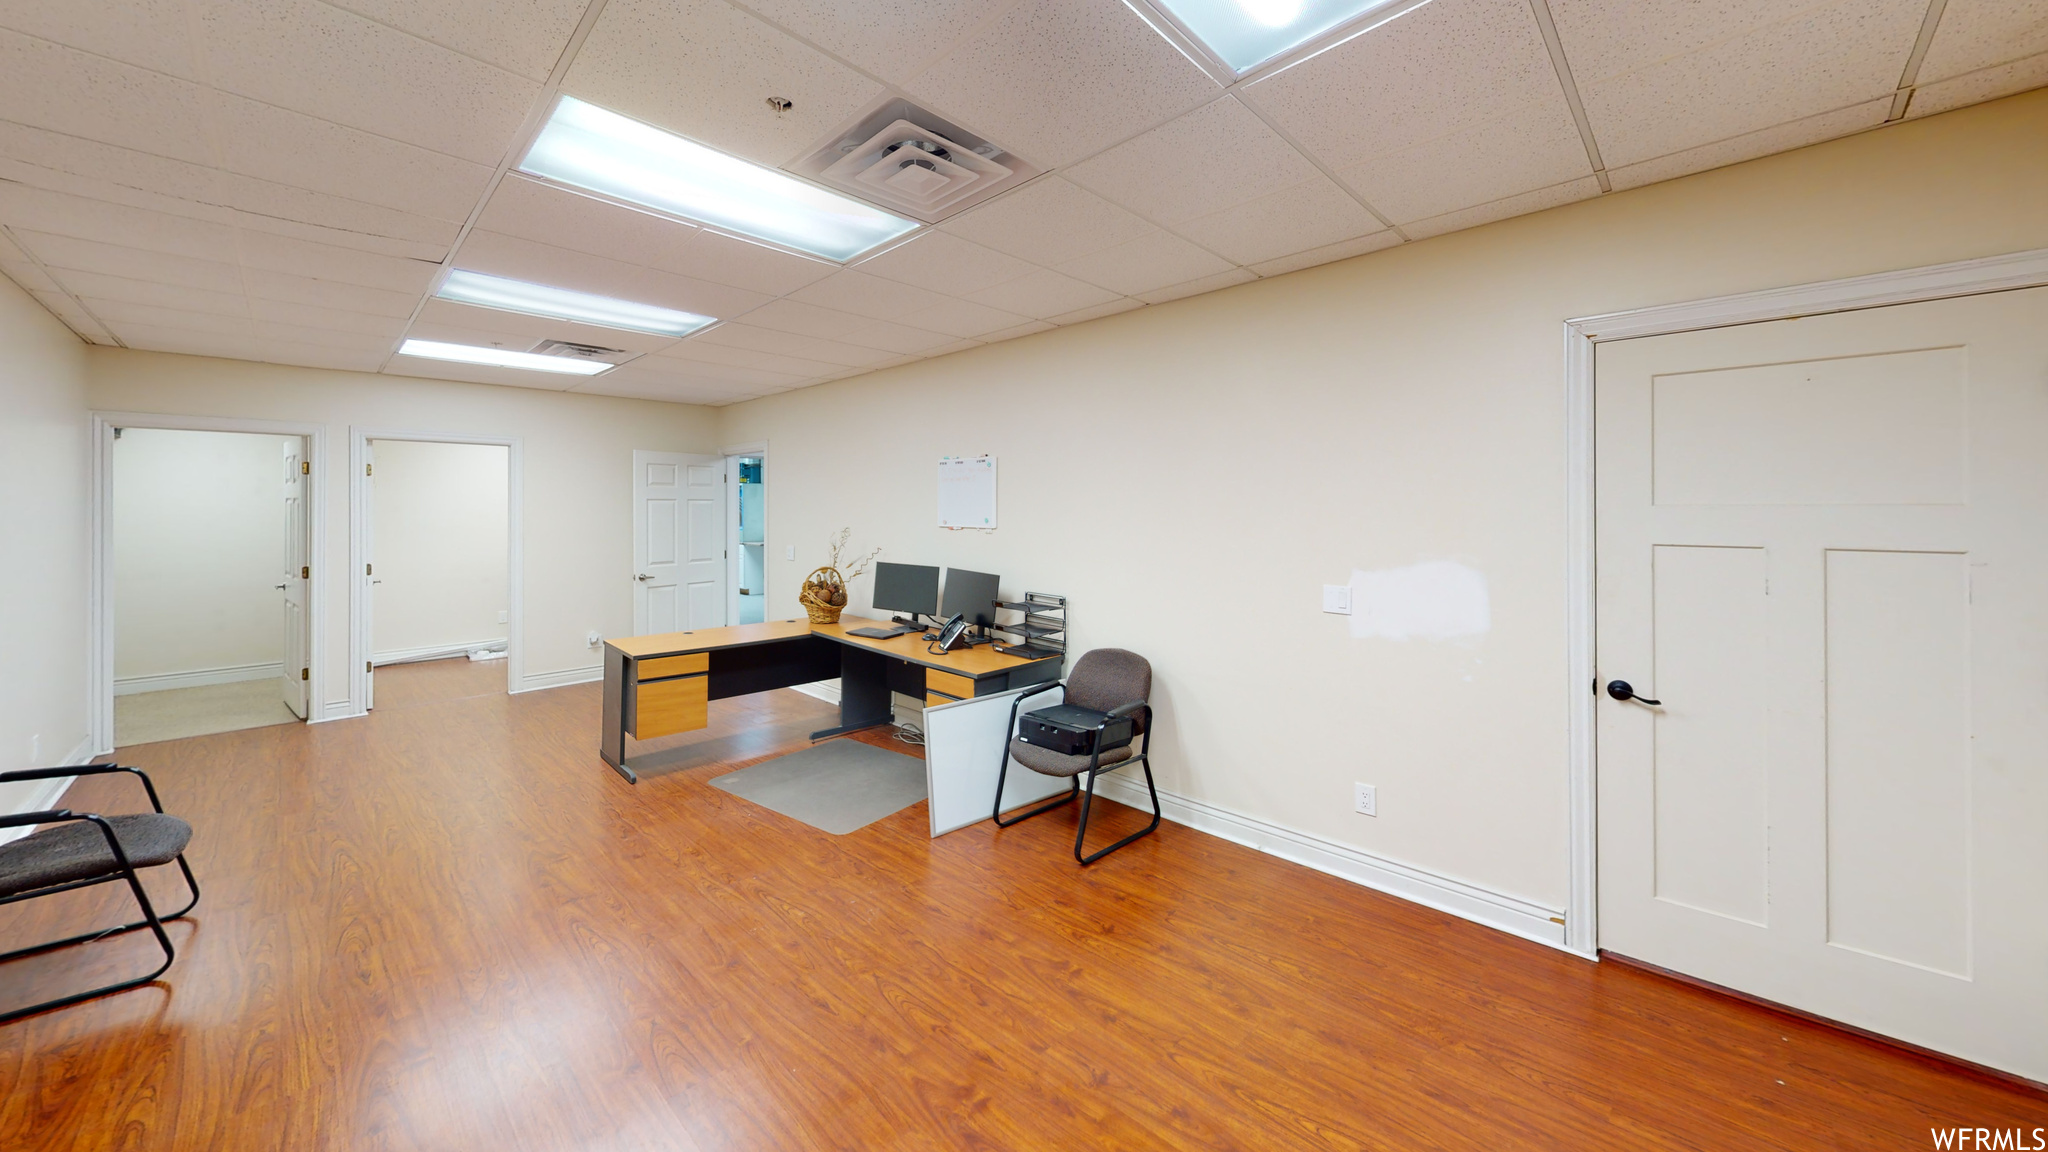 Hardwood floored office space with a drop ceiling